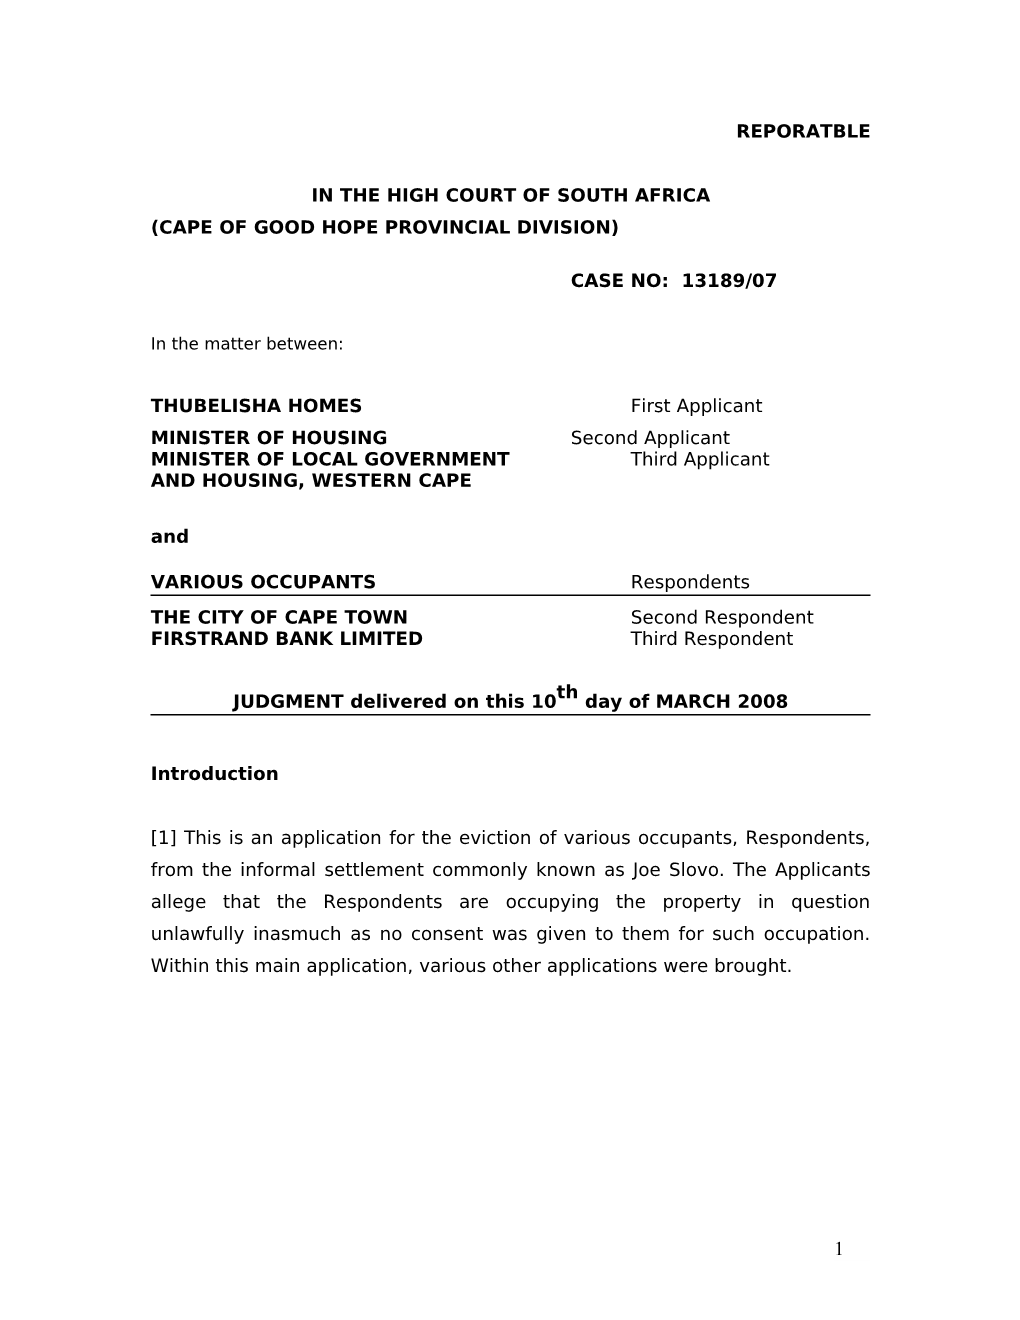 Reporatble in the High Court of South Africa (Cape of Good Hope Provincial